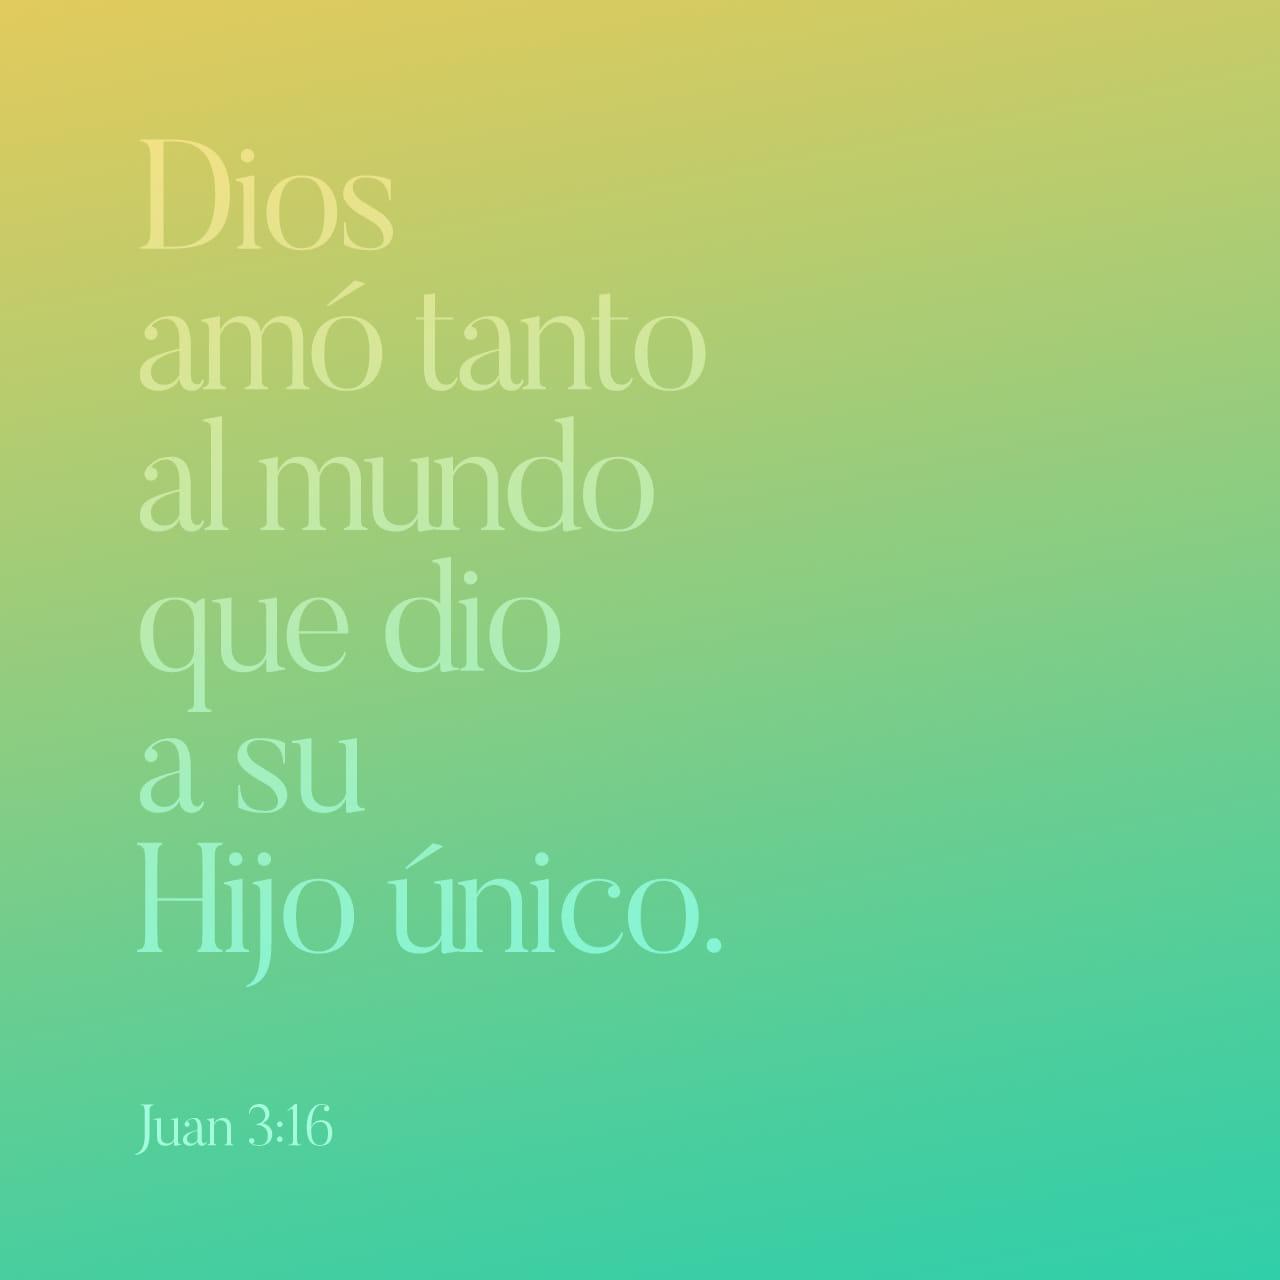 Bible Verse of the Day - day 80 - image 13785 (Juan 3:16)